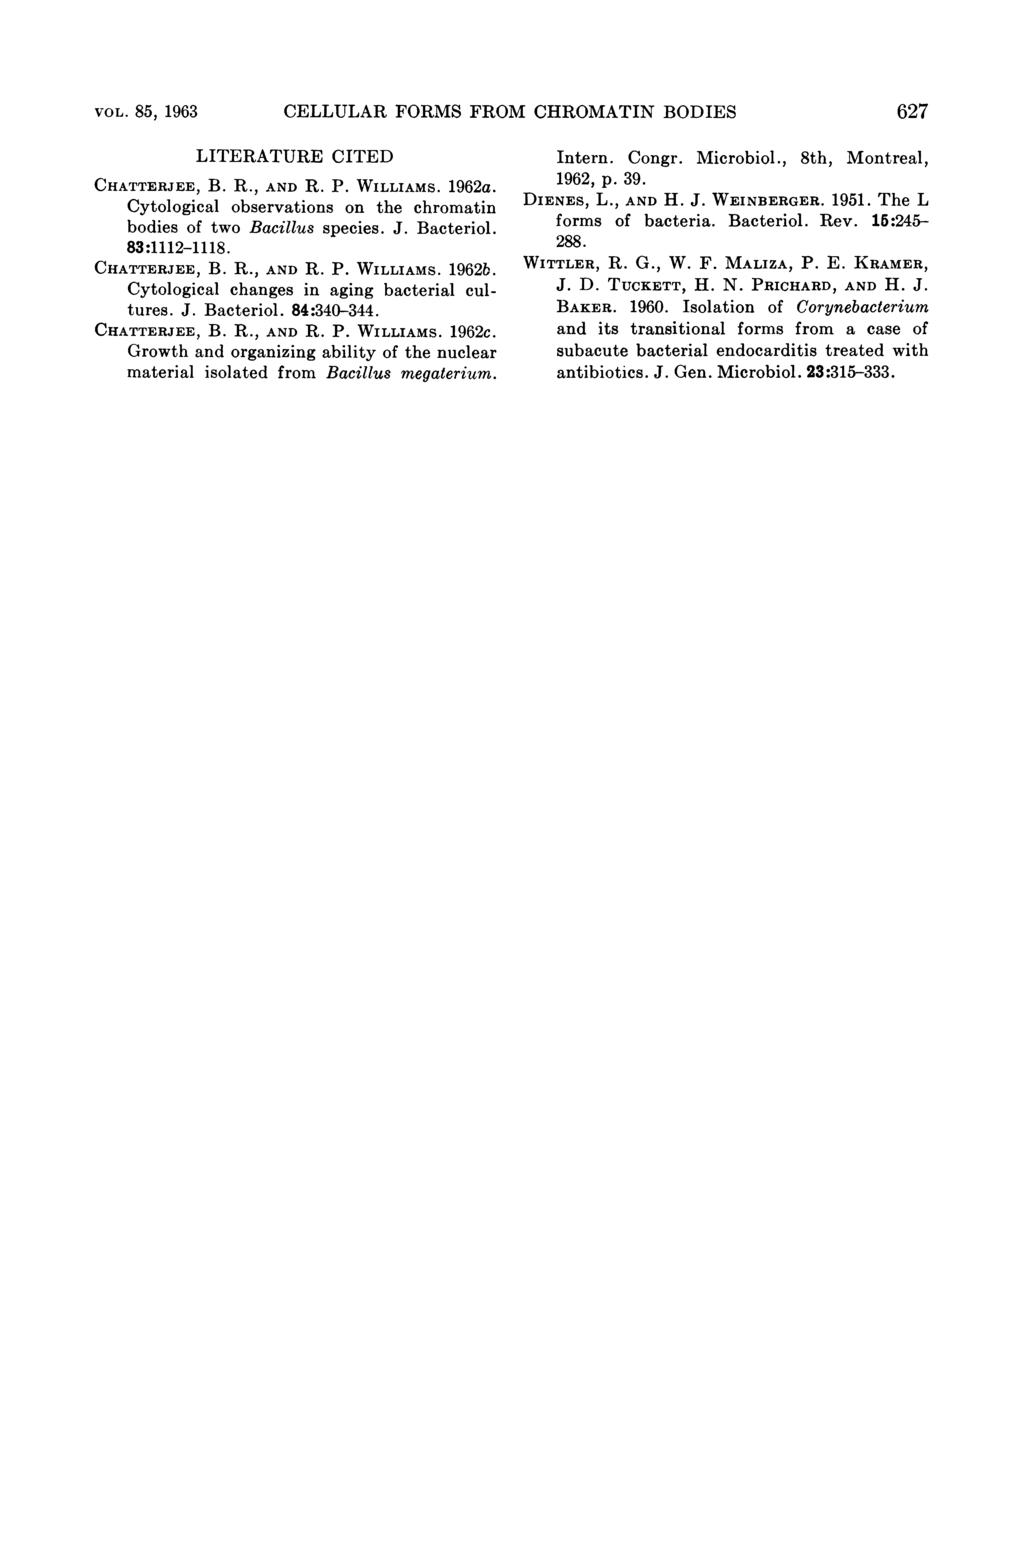 VOL. 85, 1963 CELLULAR FORMS FROM CHROMATIN BODIES 627 LITERATURE CITED CHATTERJEE, B. R., AND R. P. WILLIAMS. 1962a. Cytological observations on the chromatin bodies of two Bacillus species. J.